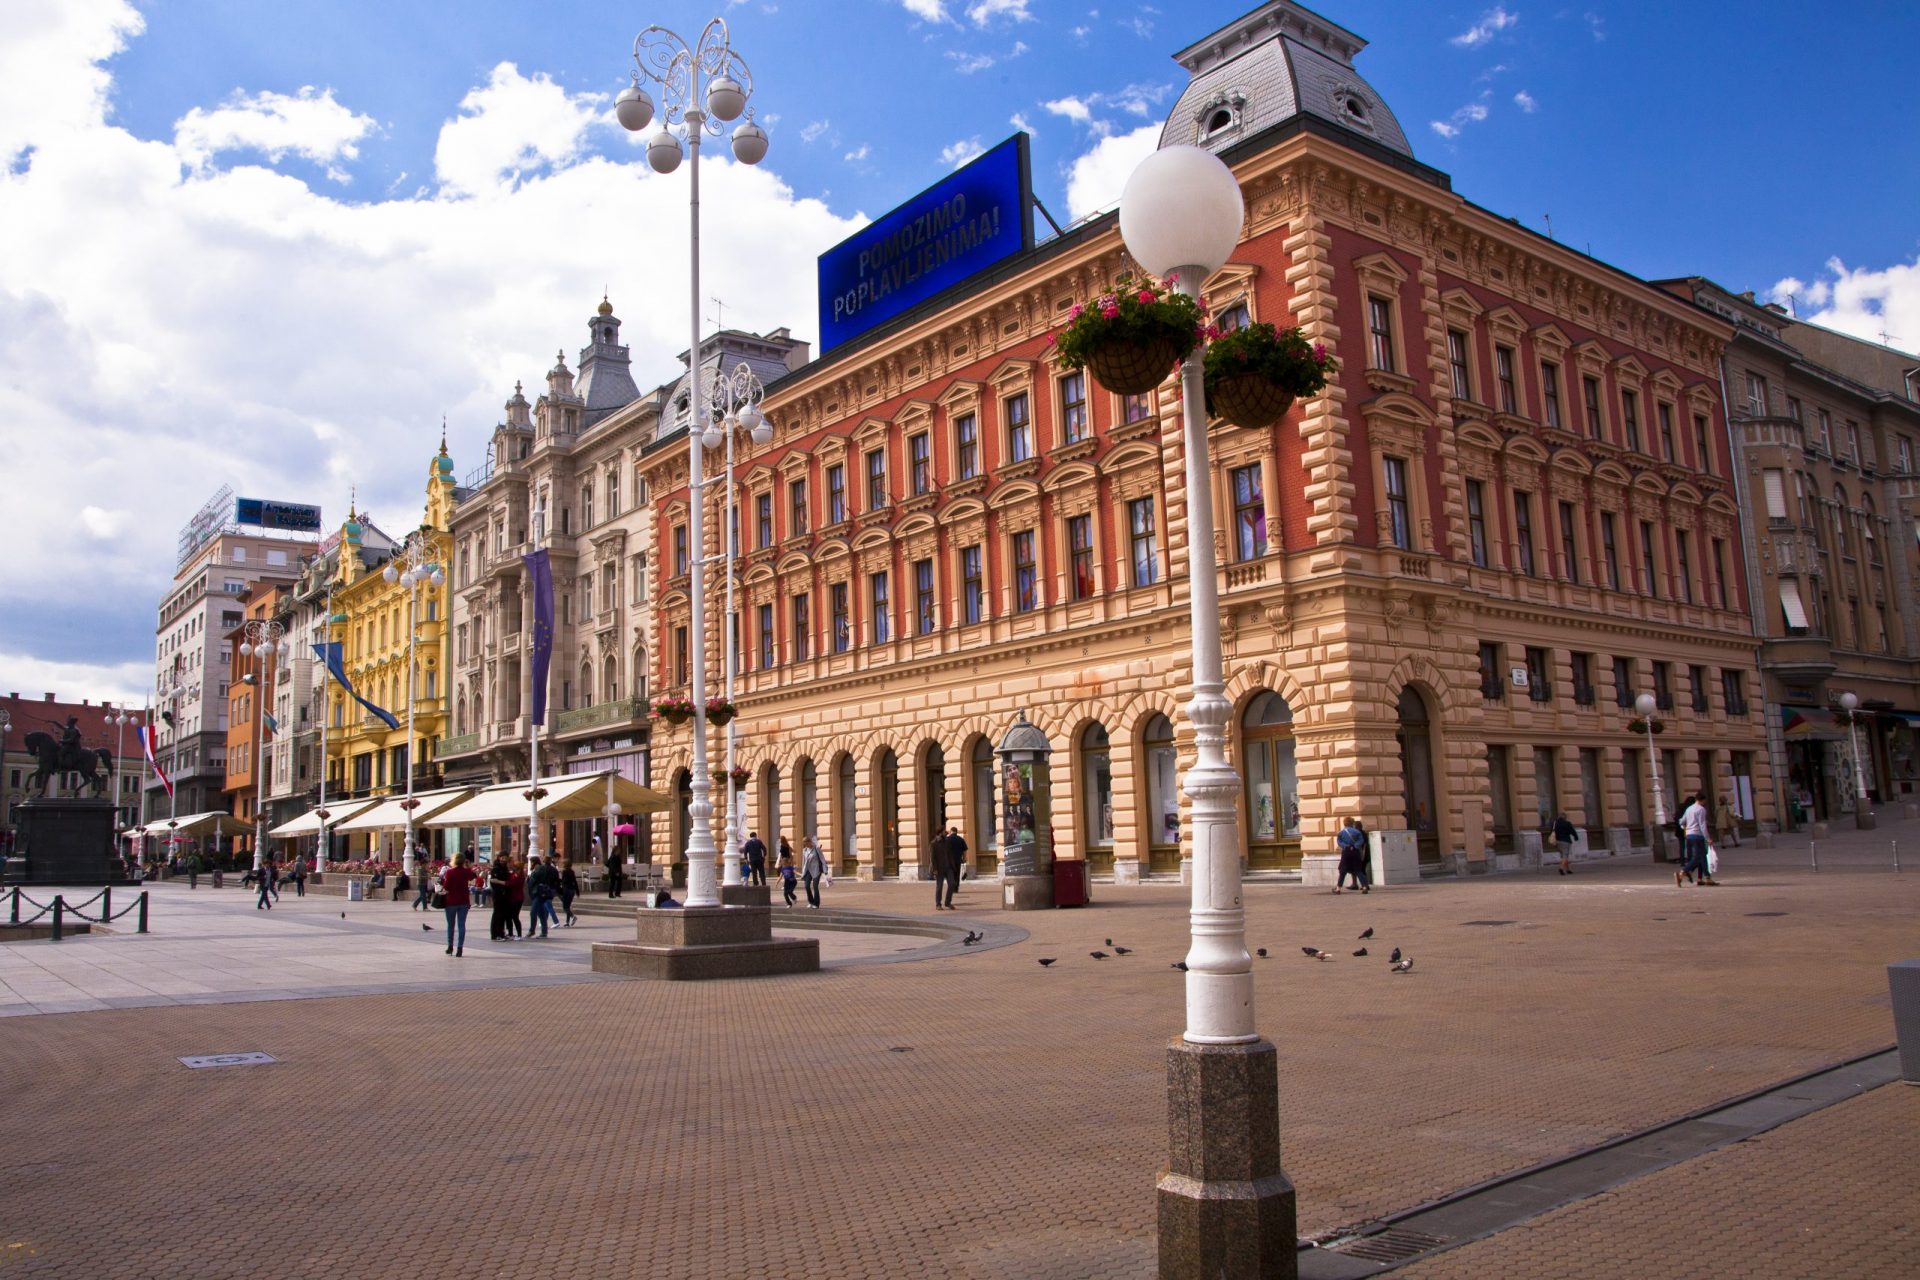 <p>Ban-Jelačić Square is the central square of Zagreb. It's an unmissable stop in the city, surrounded by cafes and restaurants where you can take a well-deserved break.</p> <p>The average price of one night in an Airbnb in Zagreb (according to Time Out) is €57 ($61.50).</p>